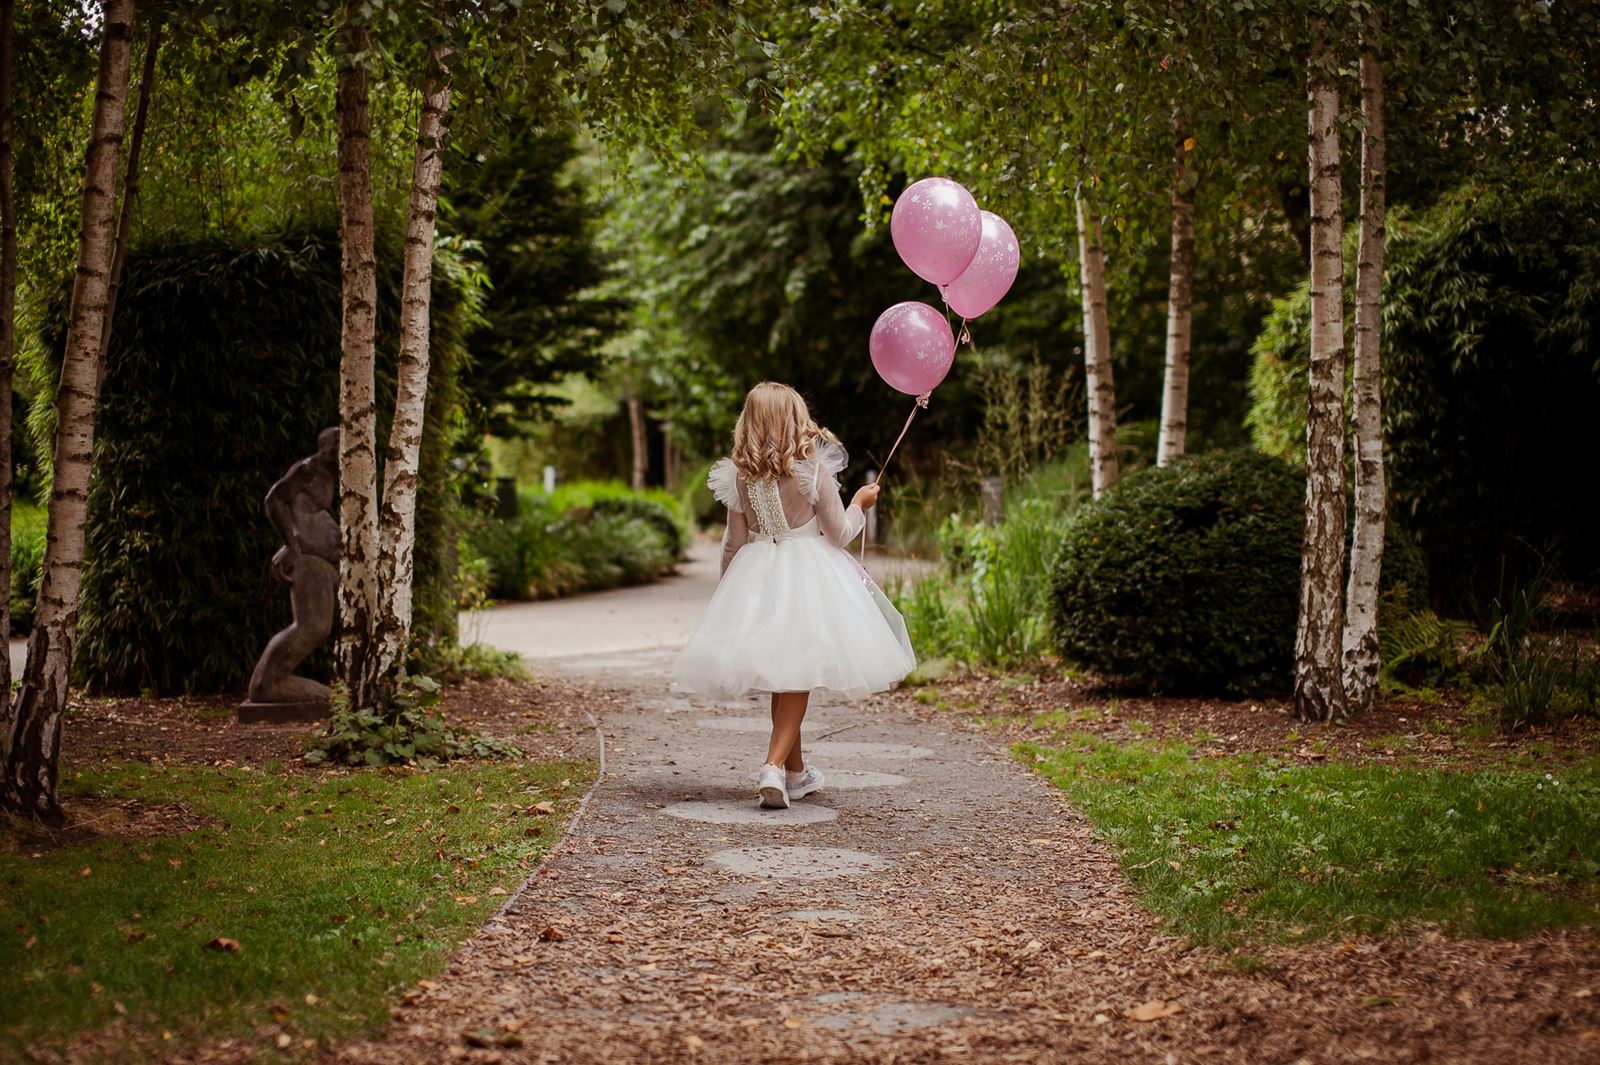 gilr in white dress and baloons in park